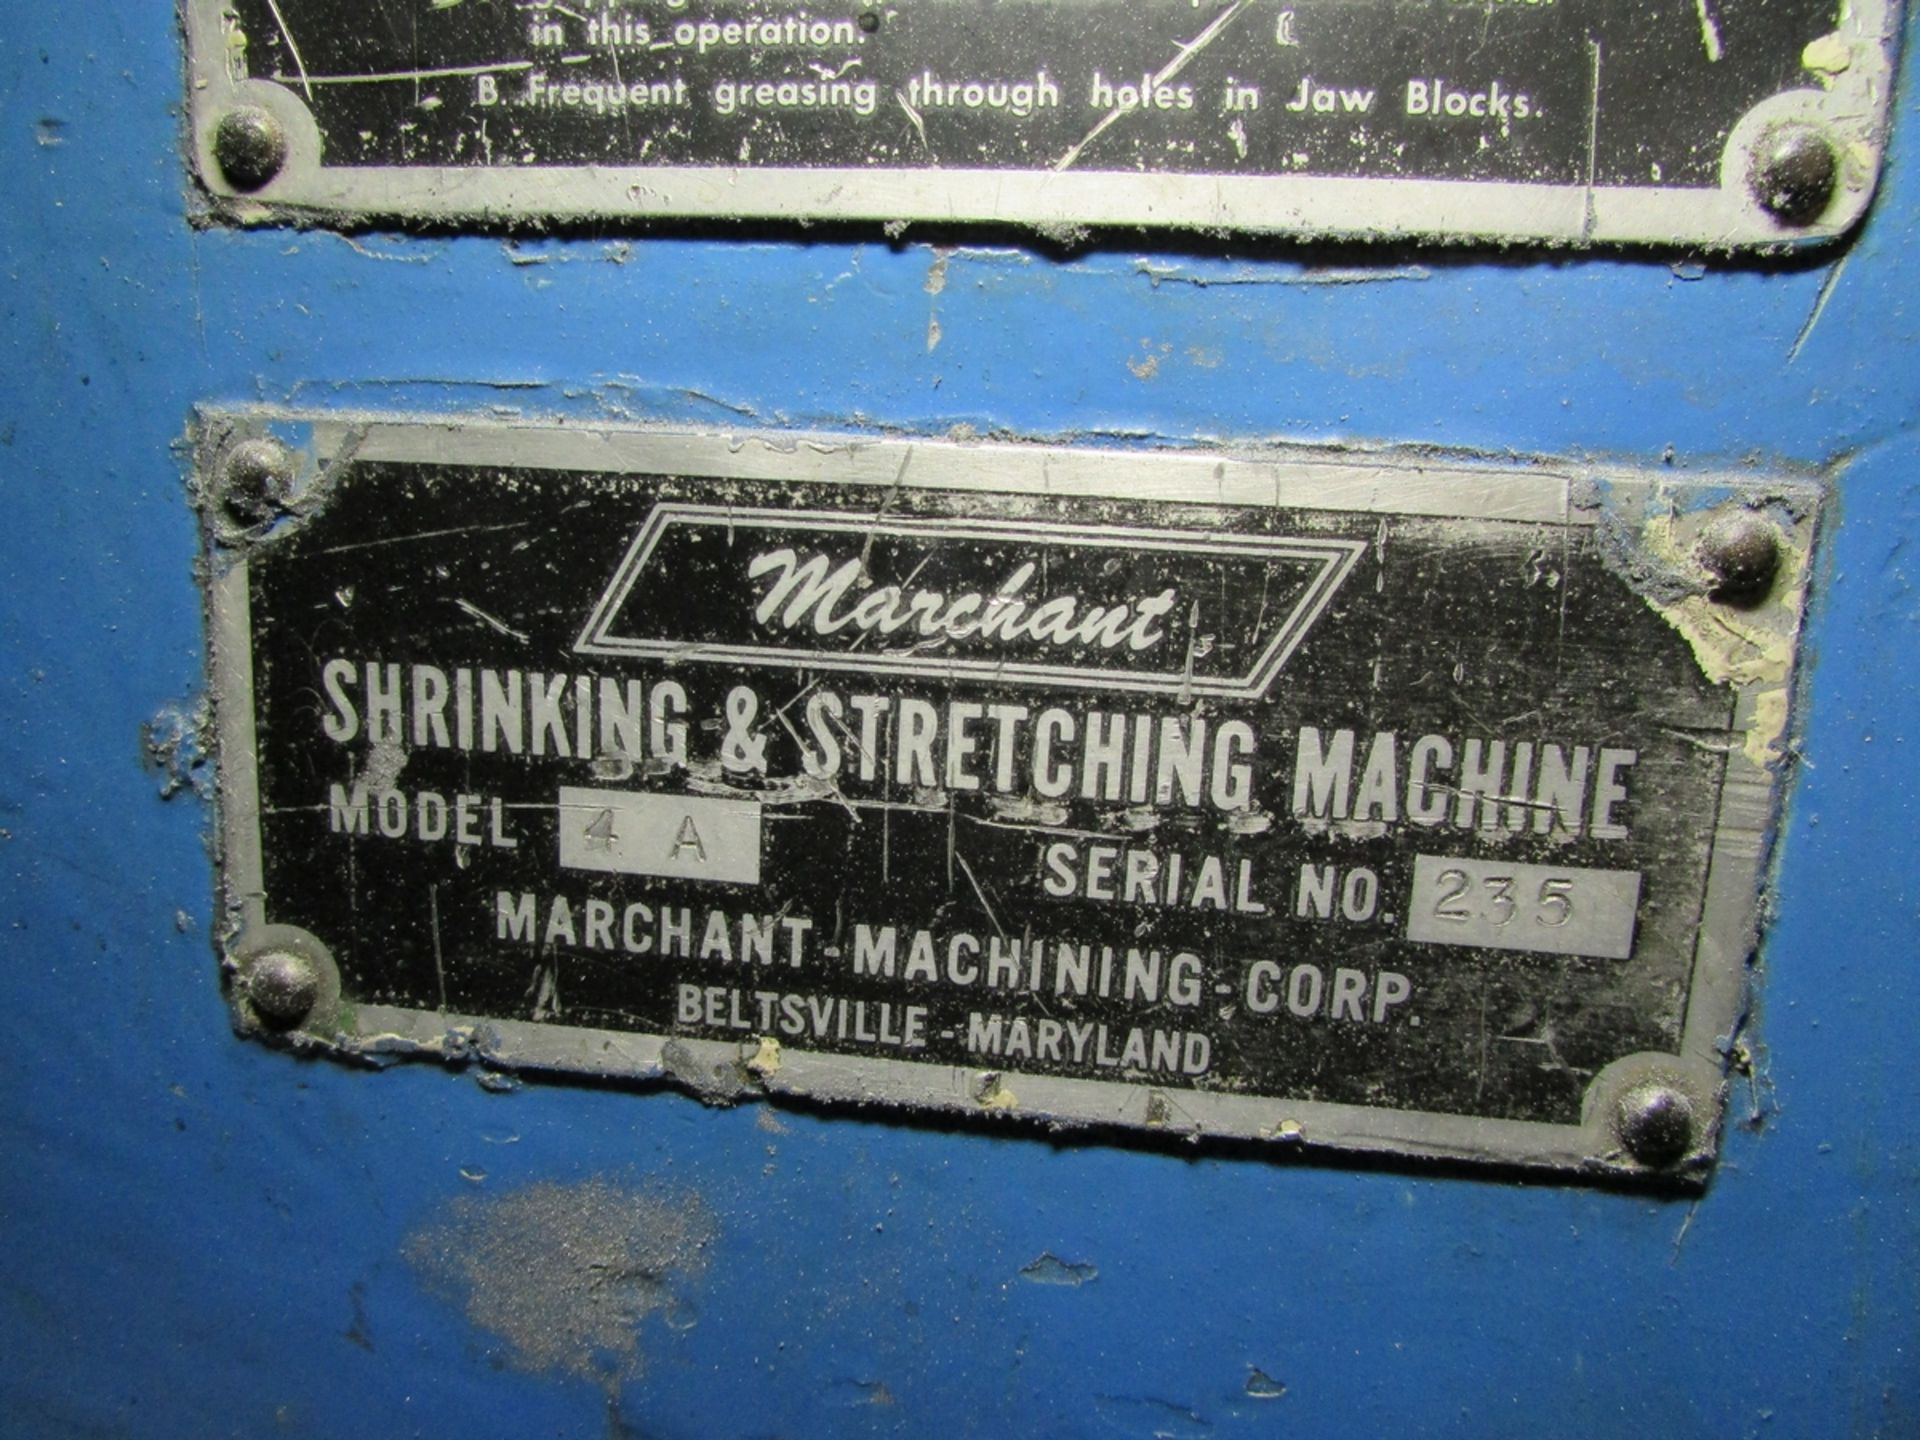 MARCHANT MACHINE CORP SHRINKING AND STRETCHING MACHINE, MODEL 4A, S/N 235 - Image 10 of 10